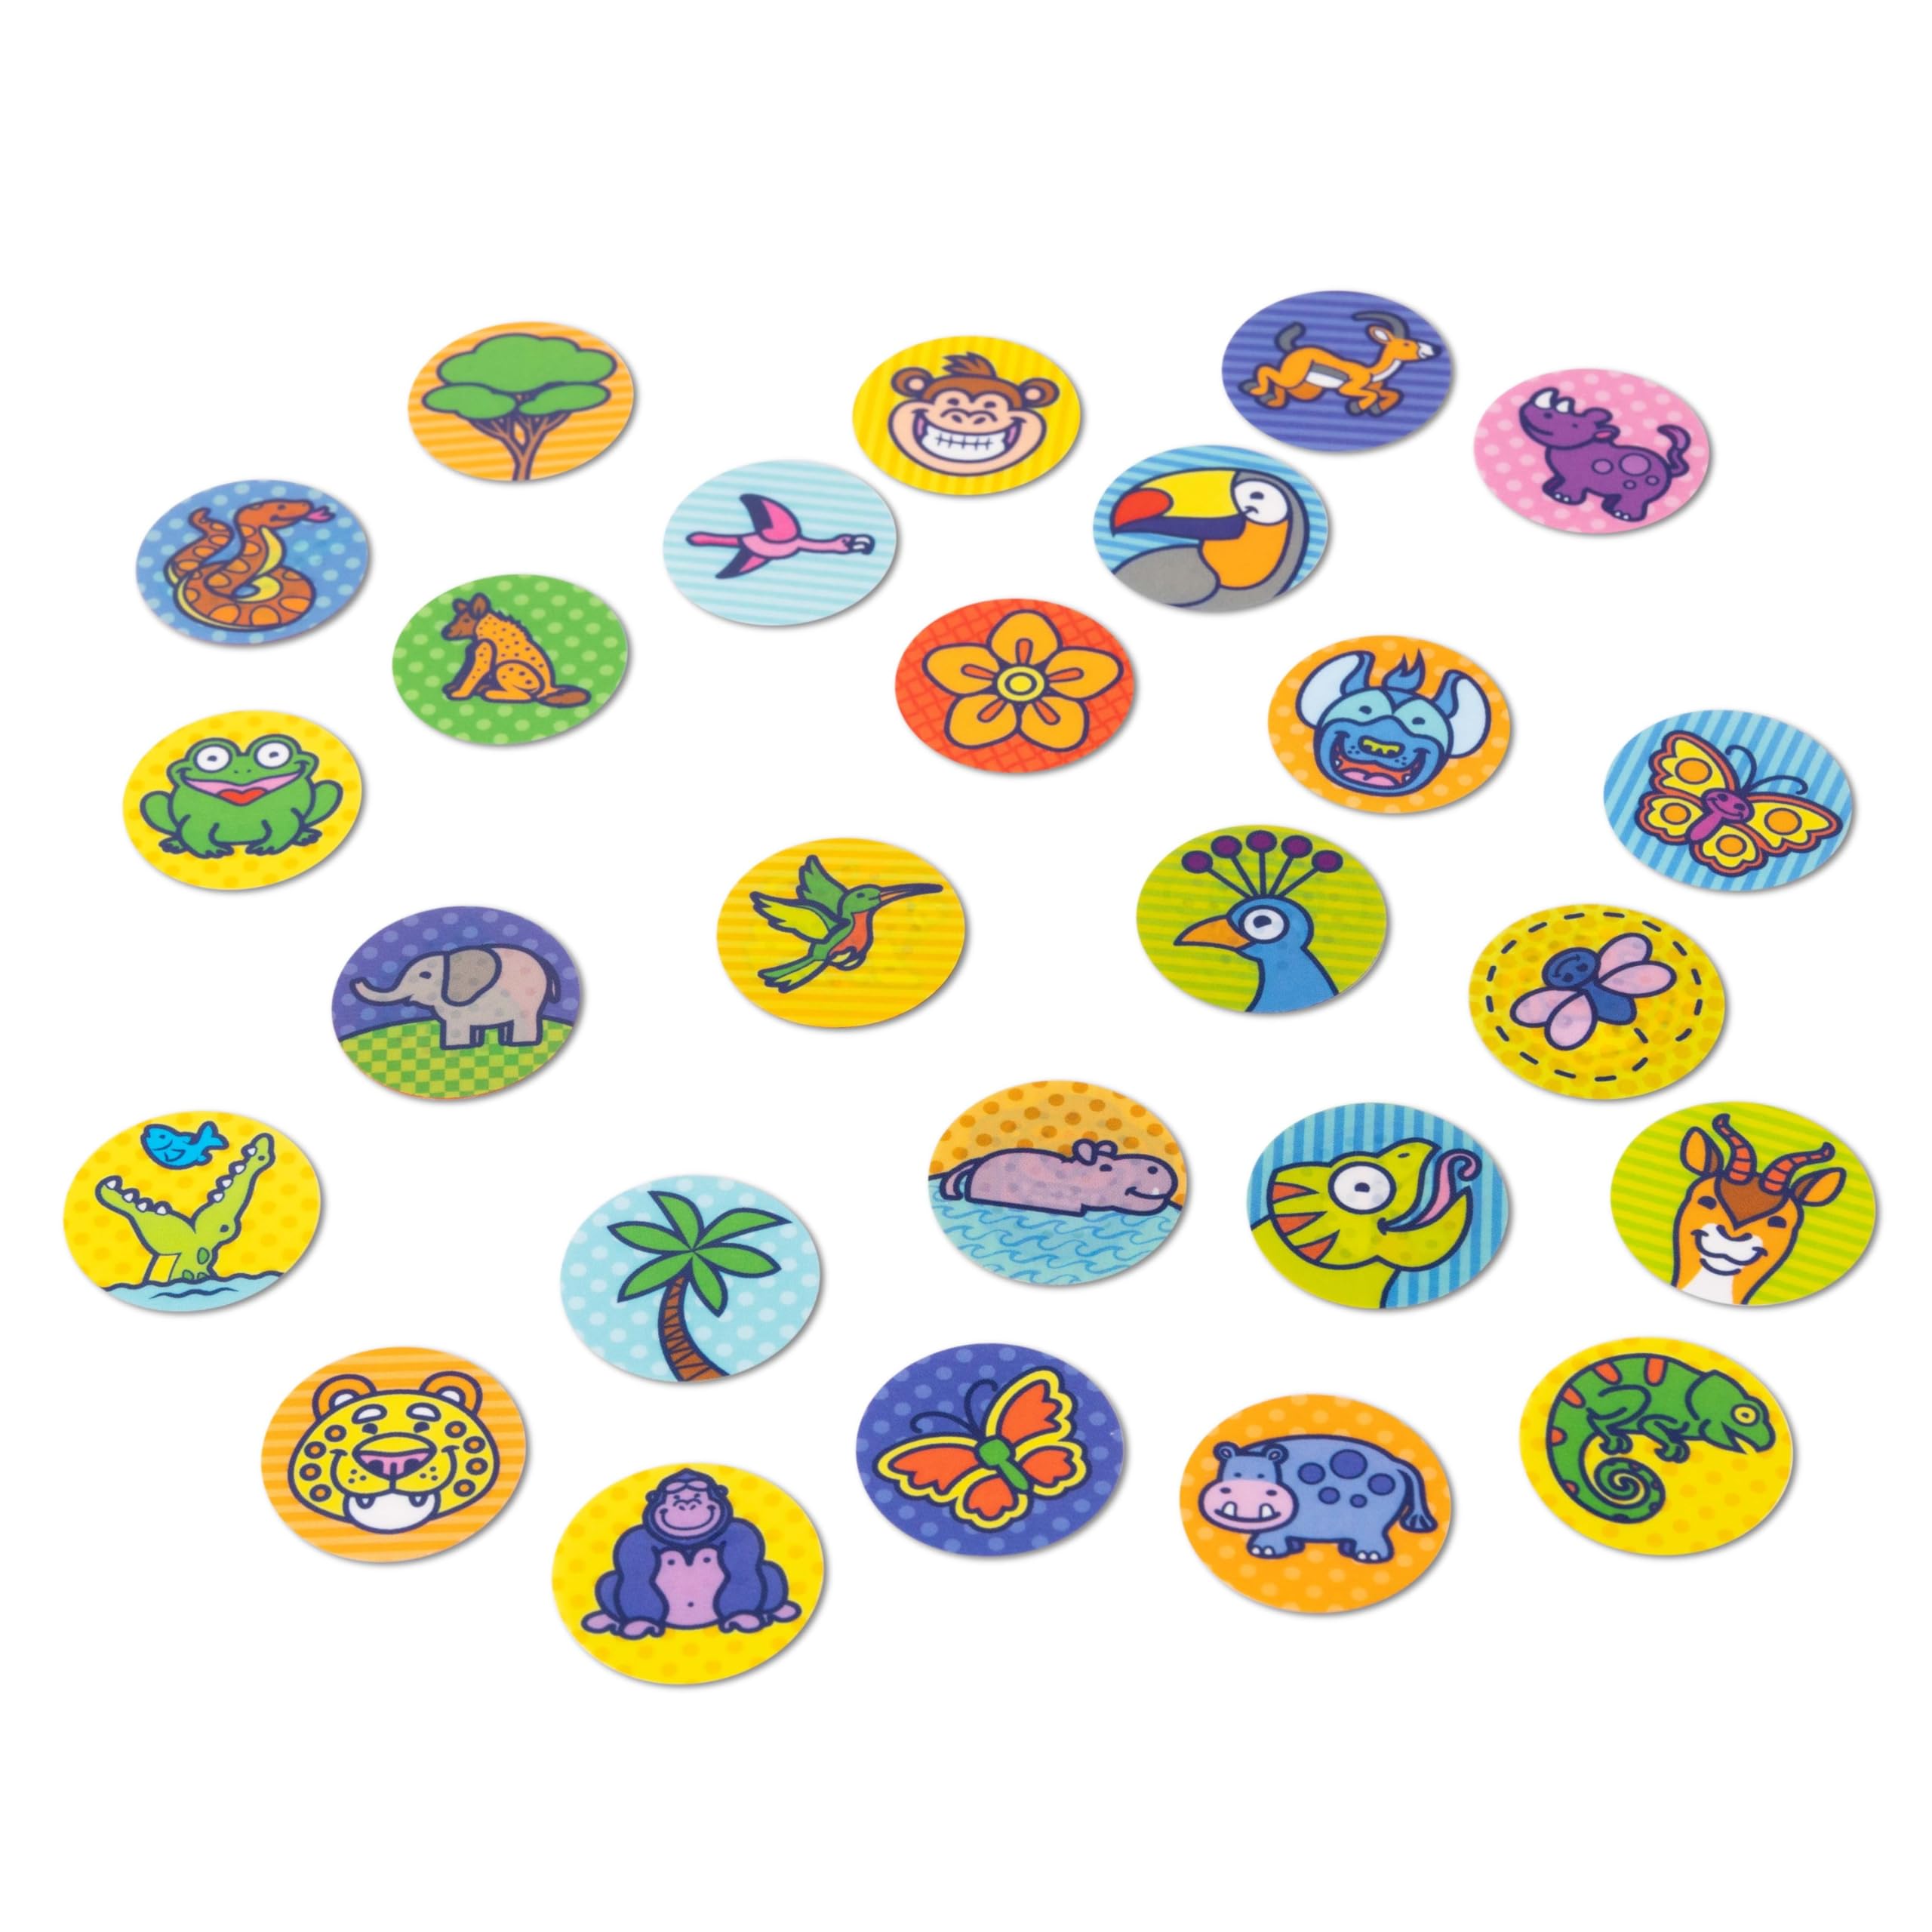 Melissa & Doug Sticker Wow!™ 300+ Refill Stickers for Sticker Stamper Arts and Crafts Fidget Toy Collectibles – Tiger Safari Theme, Assorted (Stickers Only) Removable Stickers for Girls and Boys 3+